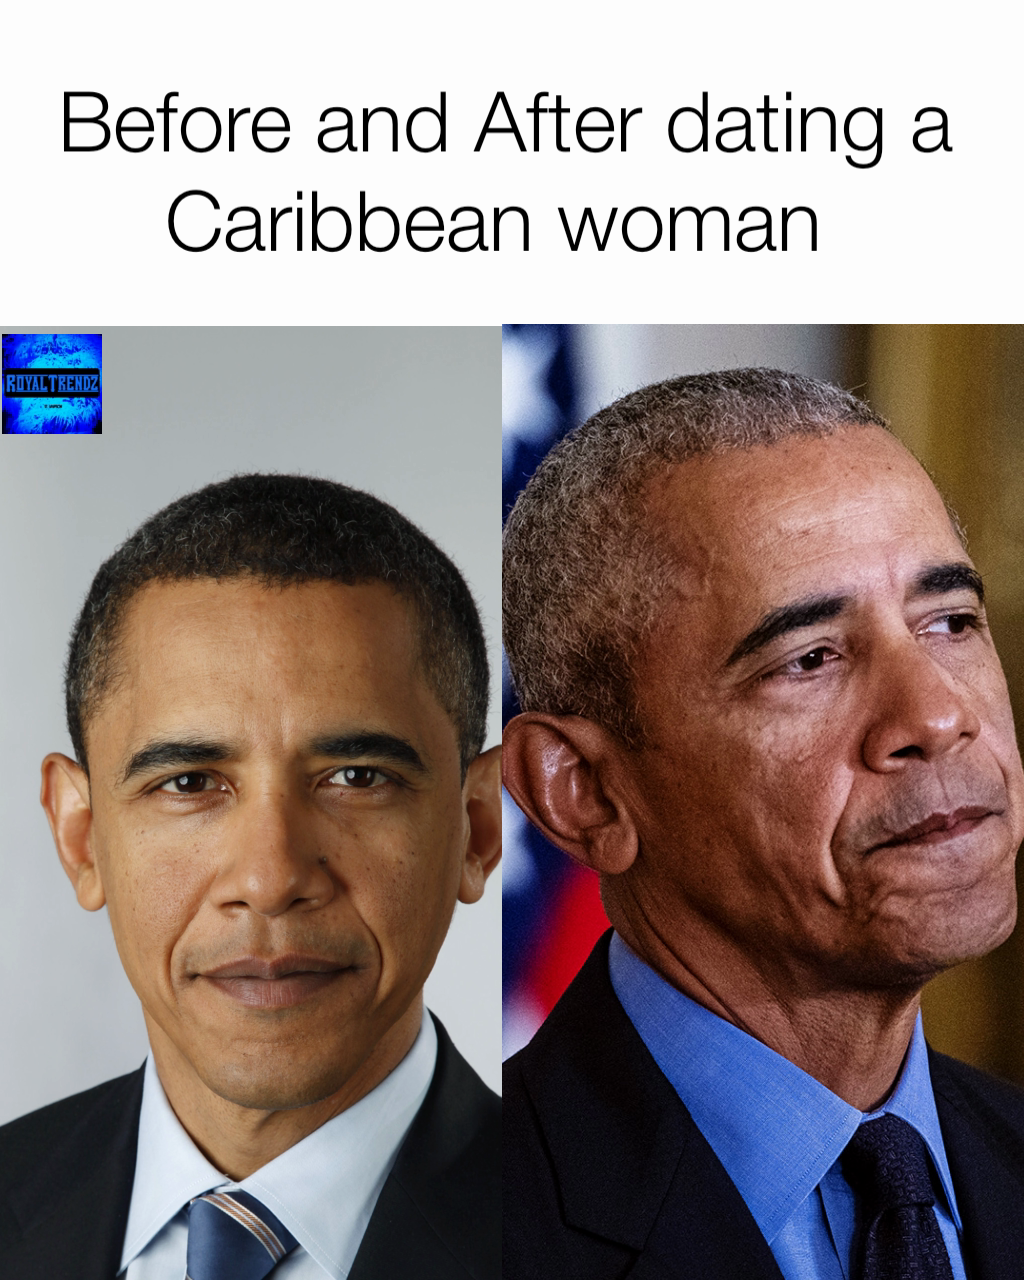 Before and After dating a Caribbean woman 